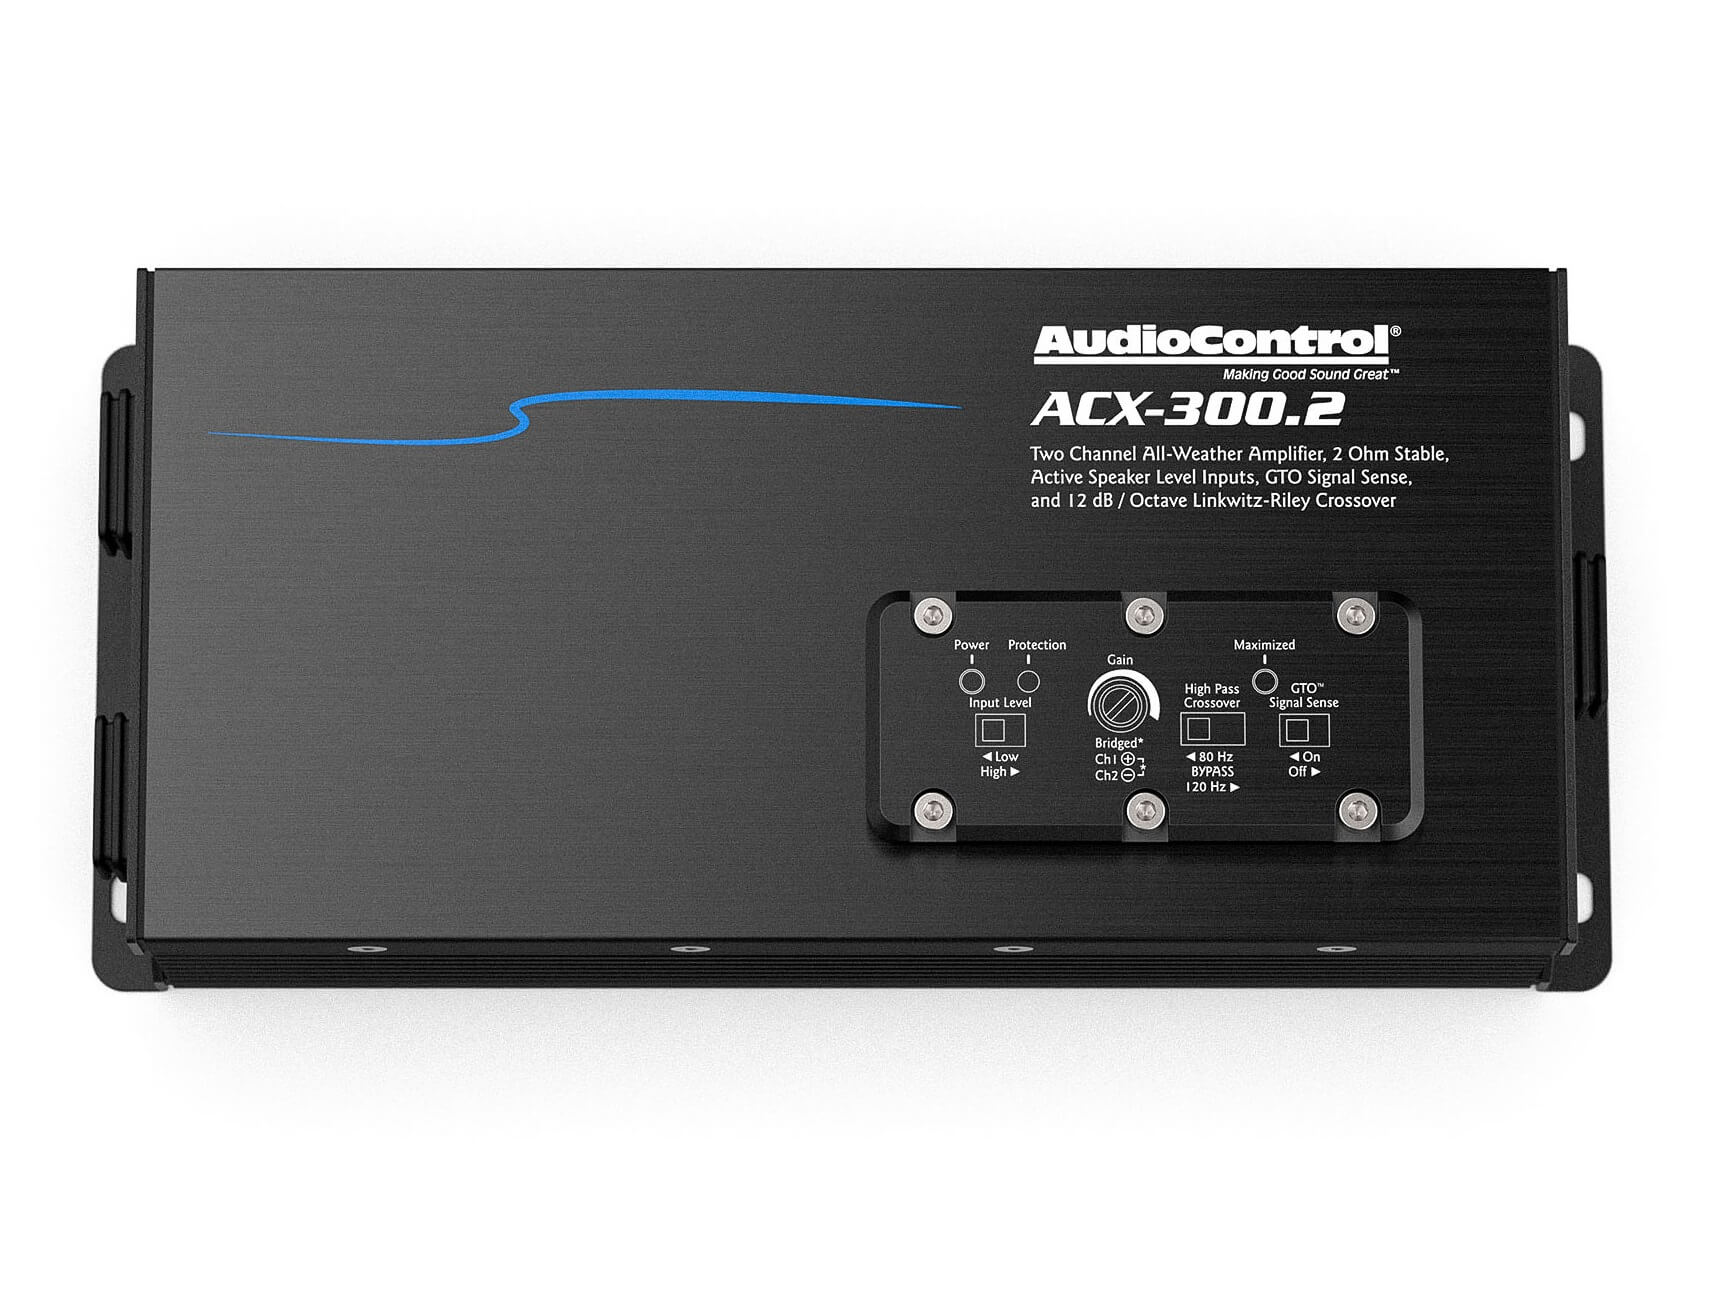 AudioControl ACX-300.2 - Top / With Cover